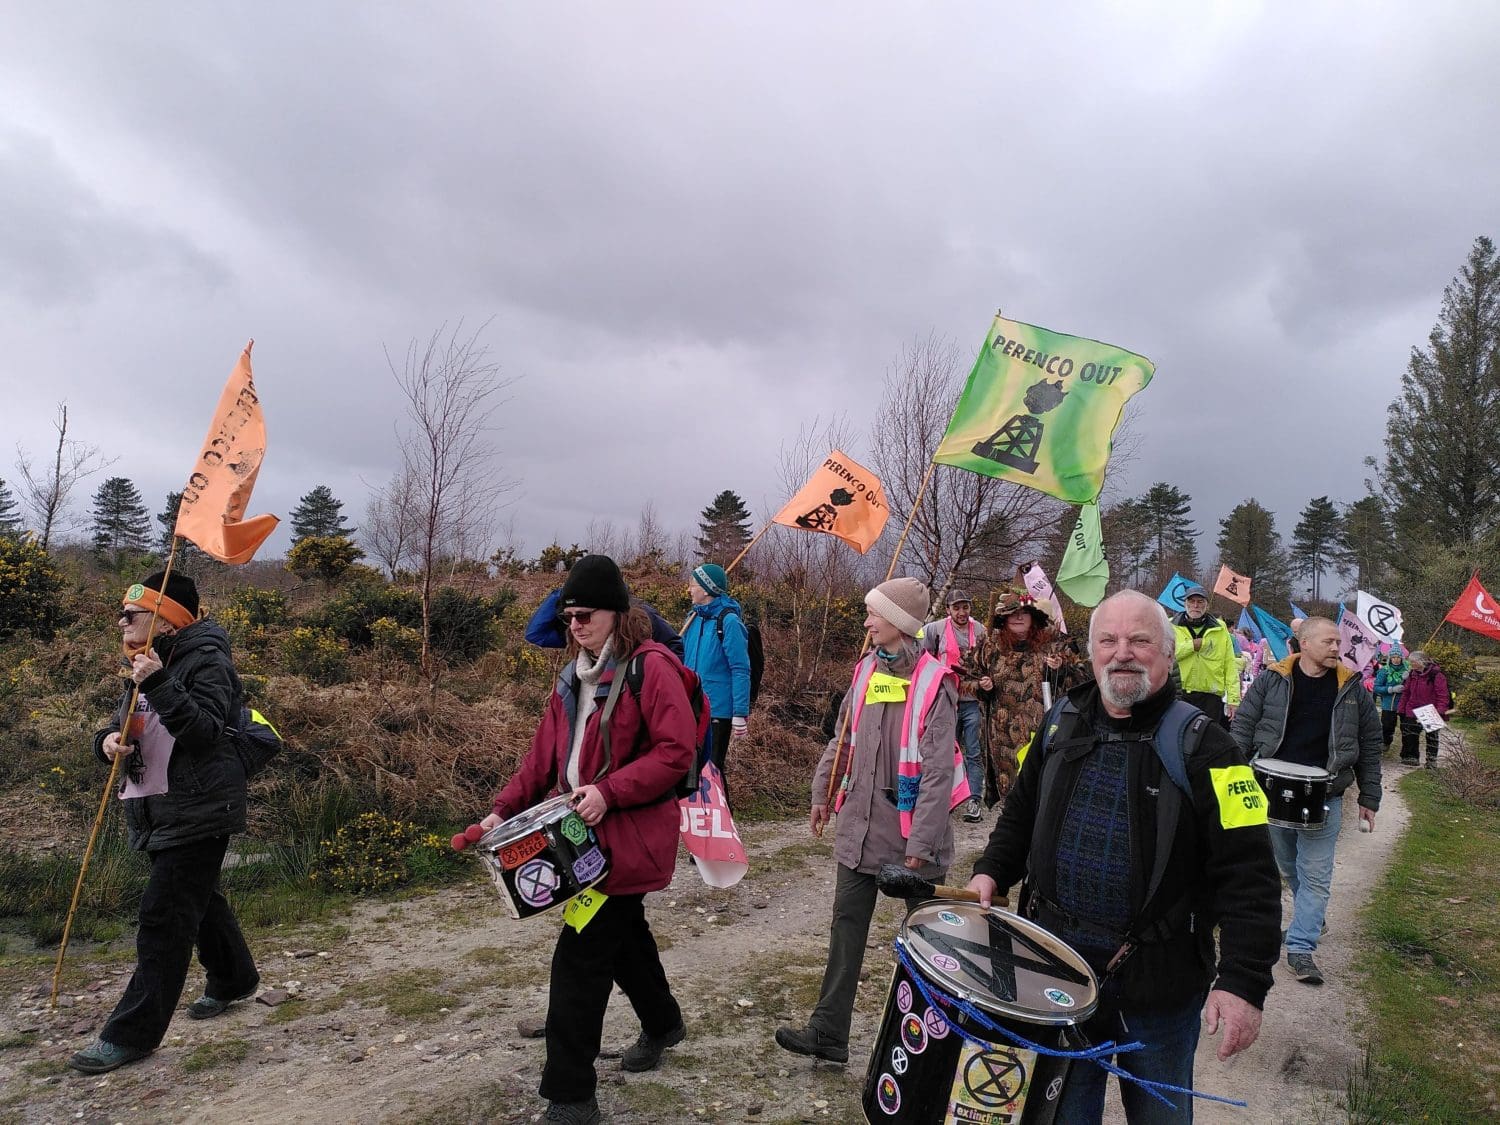 Protesters march with drums and "Perenco out" flags across the lowland heath. 